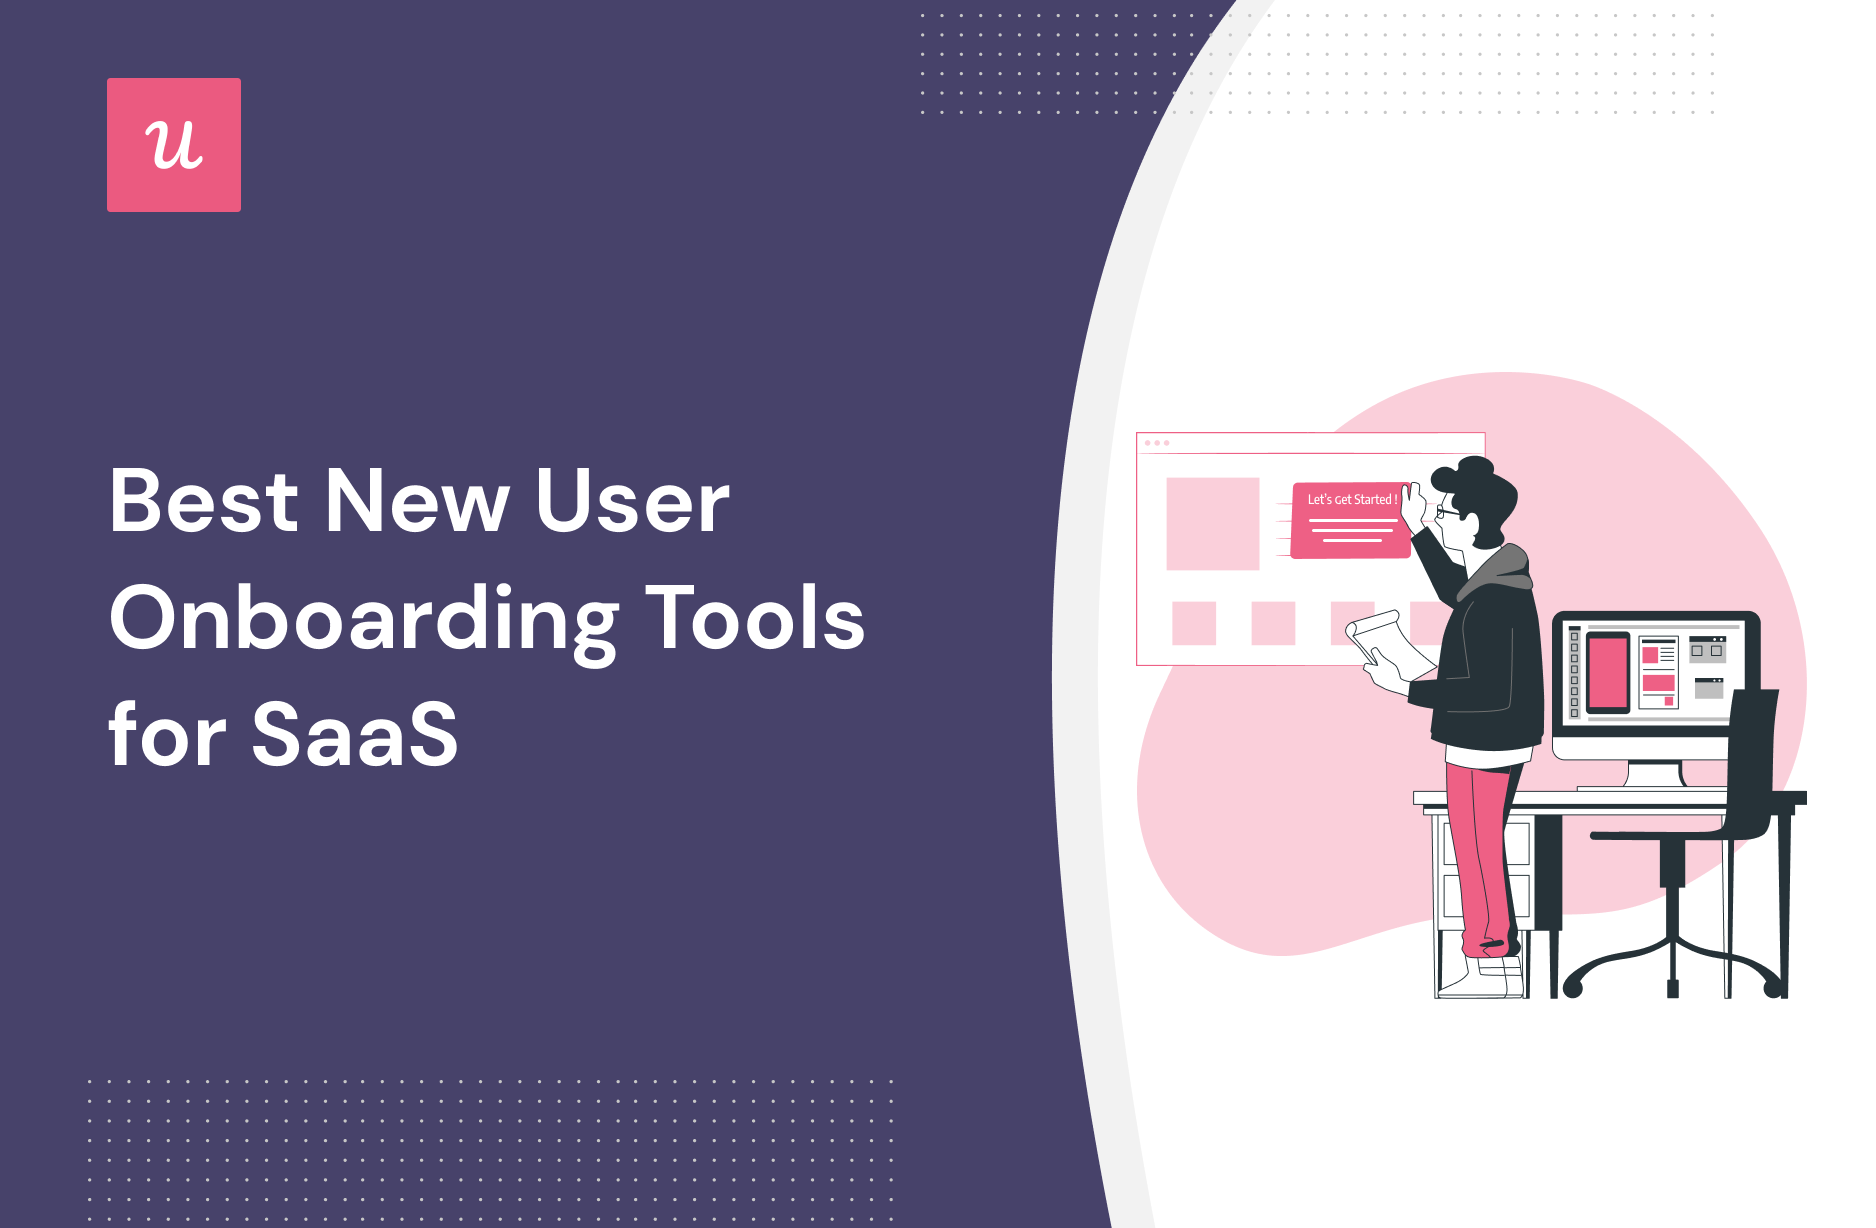 Best New User Onboarding Tools for SaaS